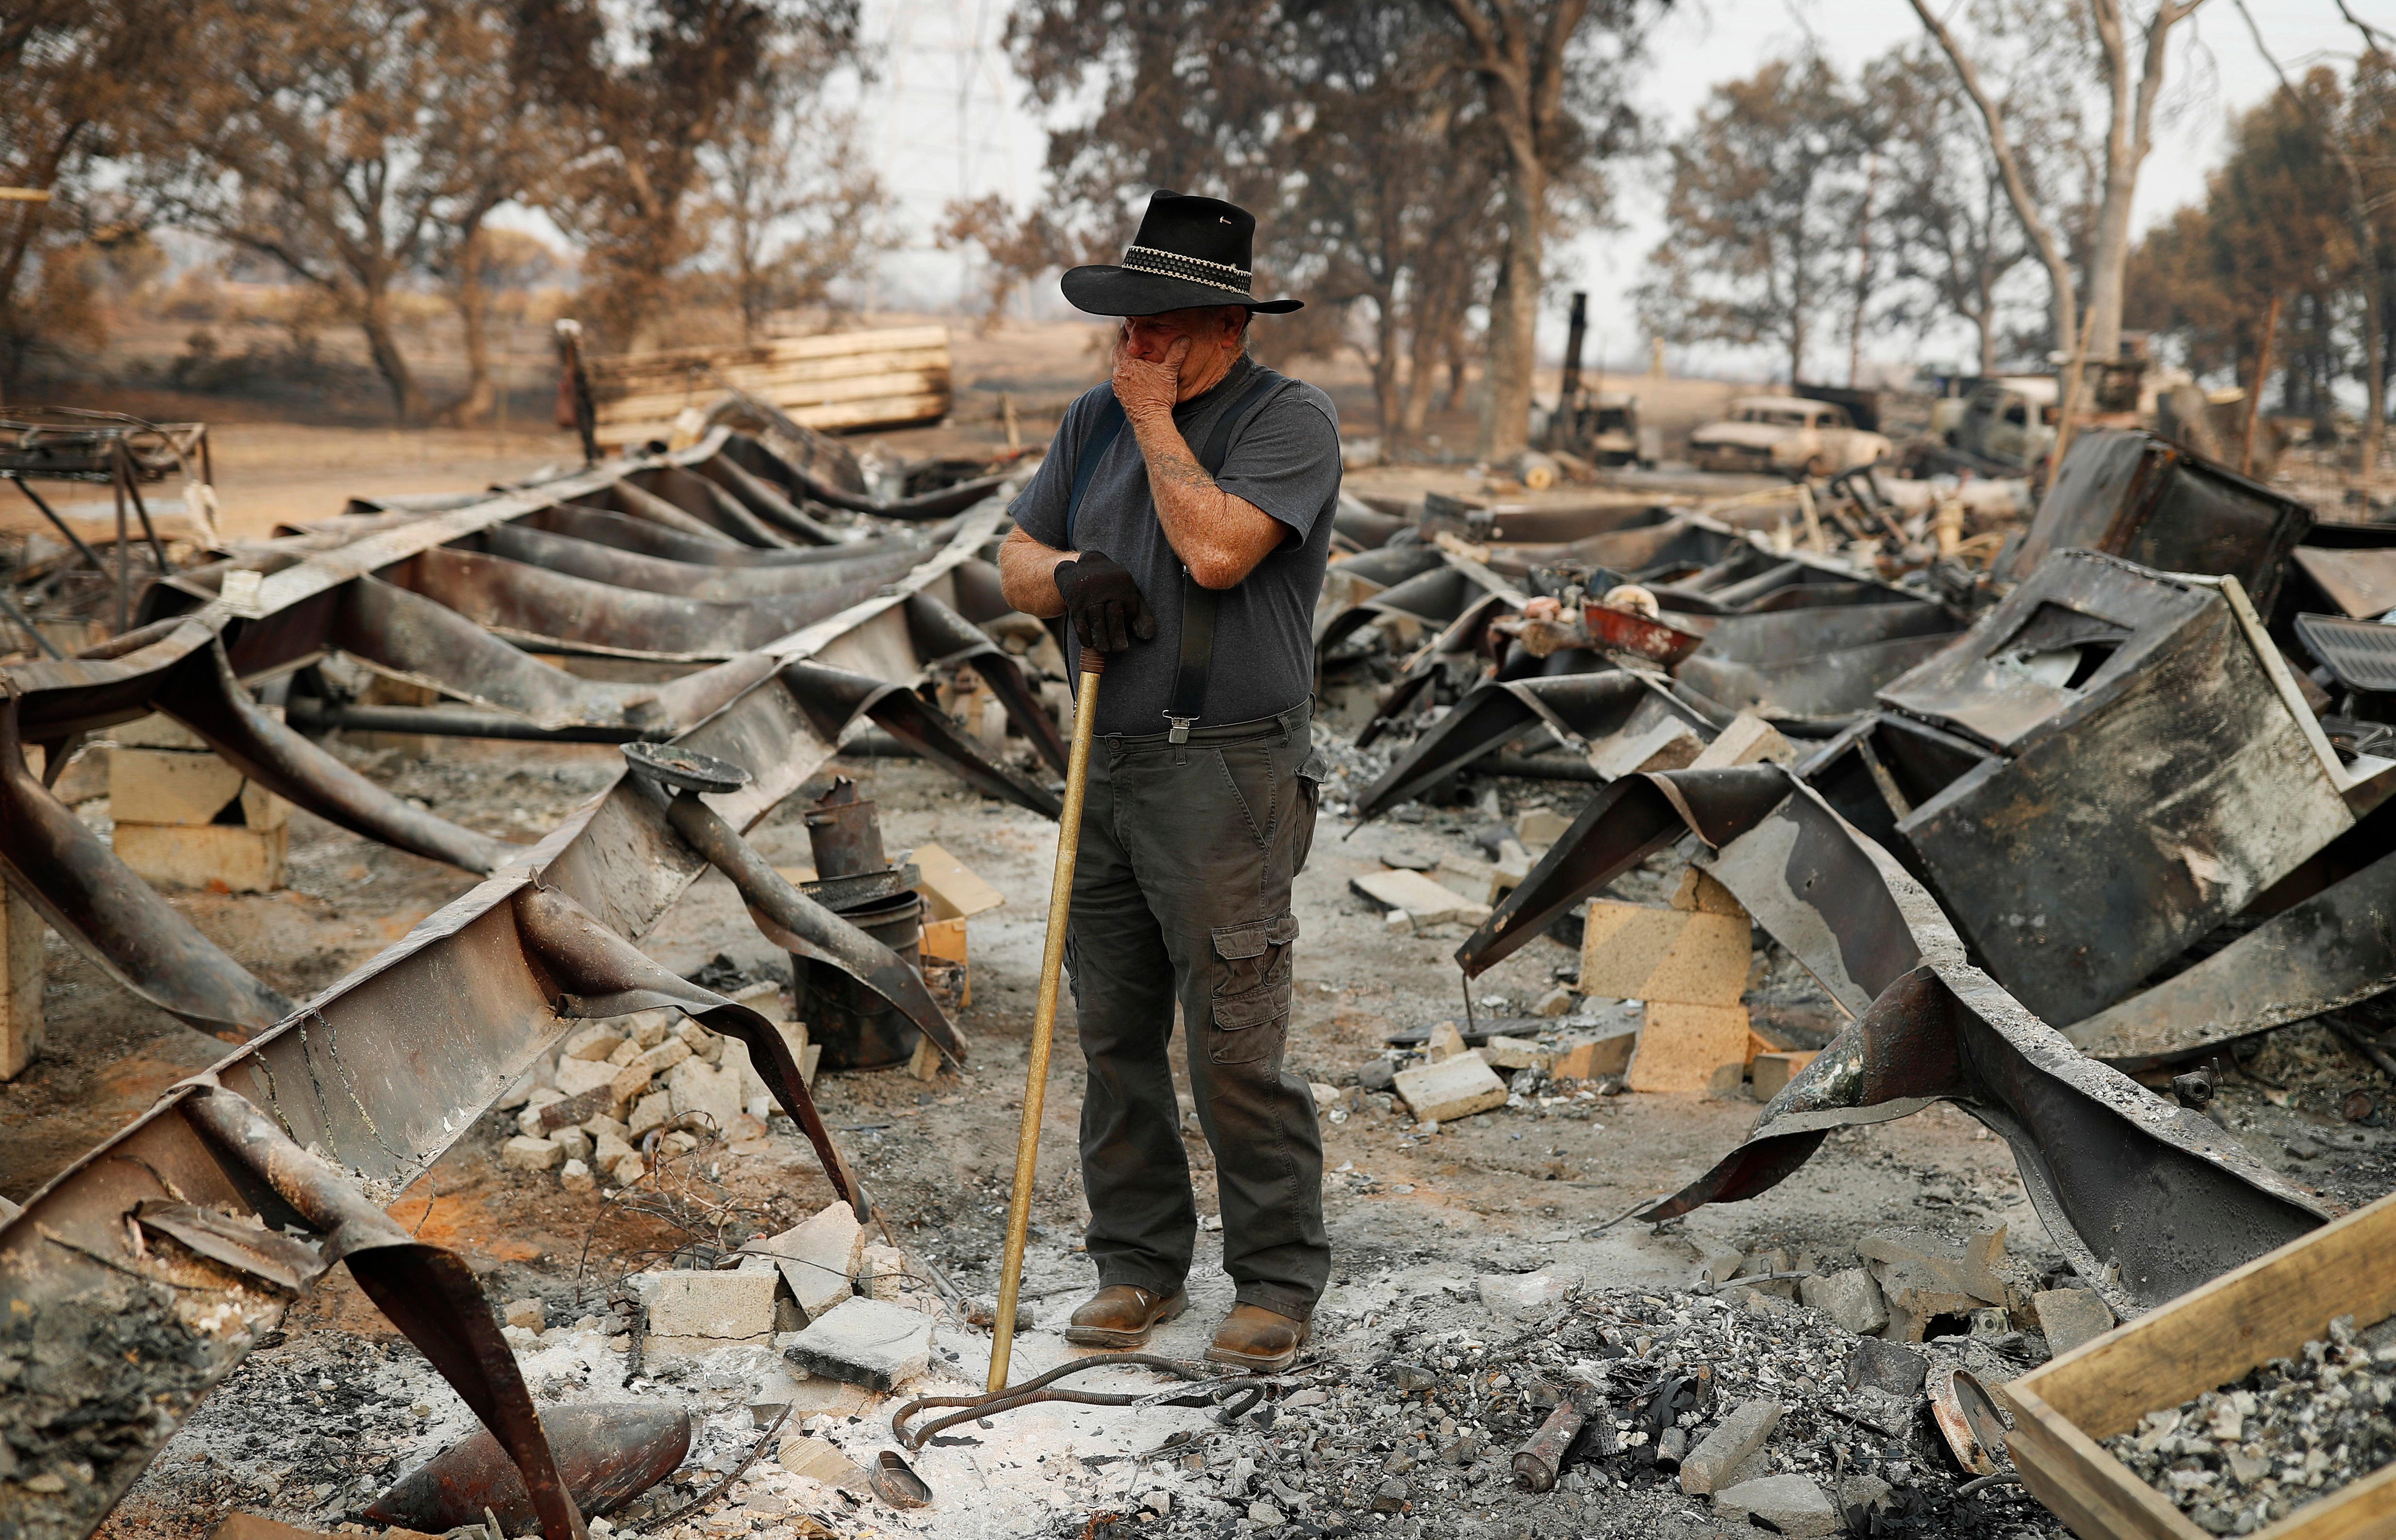 Ed Bledsoe tries to hold back tears as he searches through what remains of his home, Aug. 13, 2018, in Redding, Calif. Bledsoe's wife, Melody, great-grandson James Roberts and great-granddaughter Emily Roberts were killed at the home in the Carr Fire